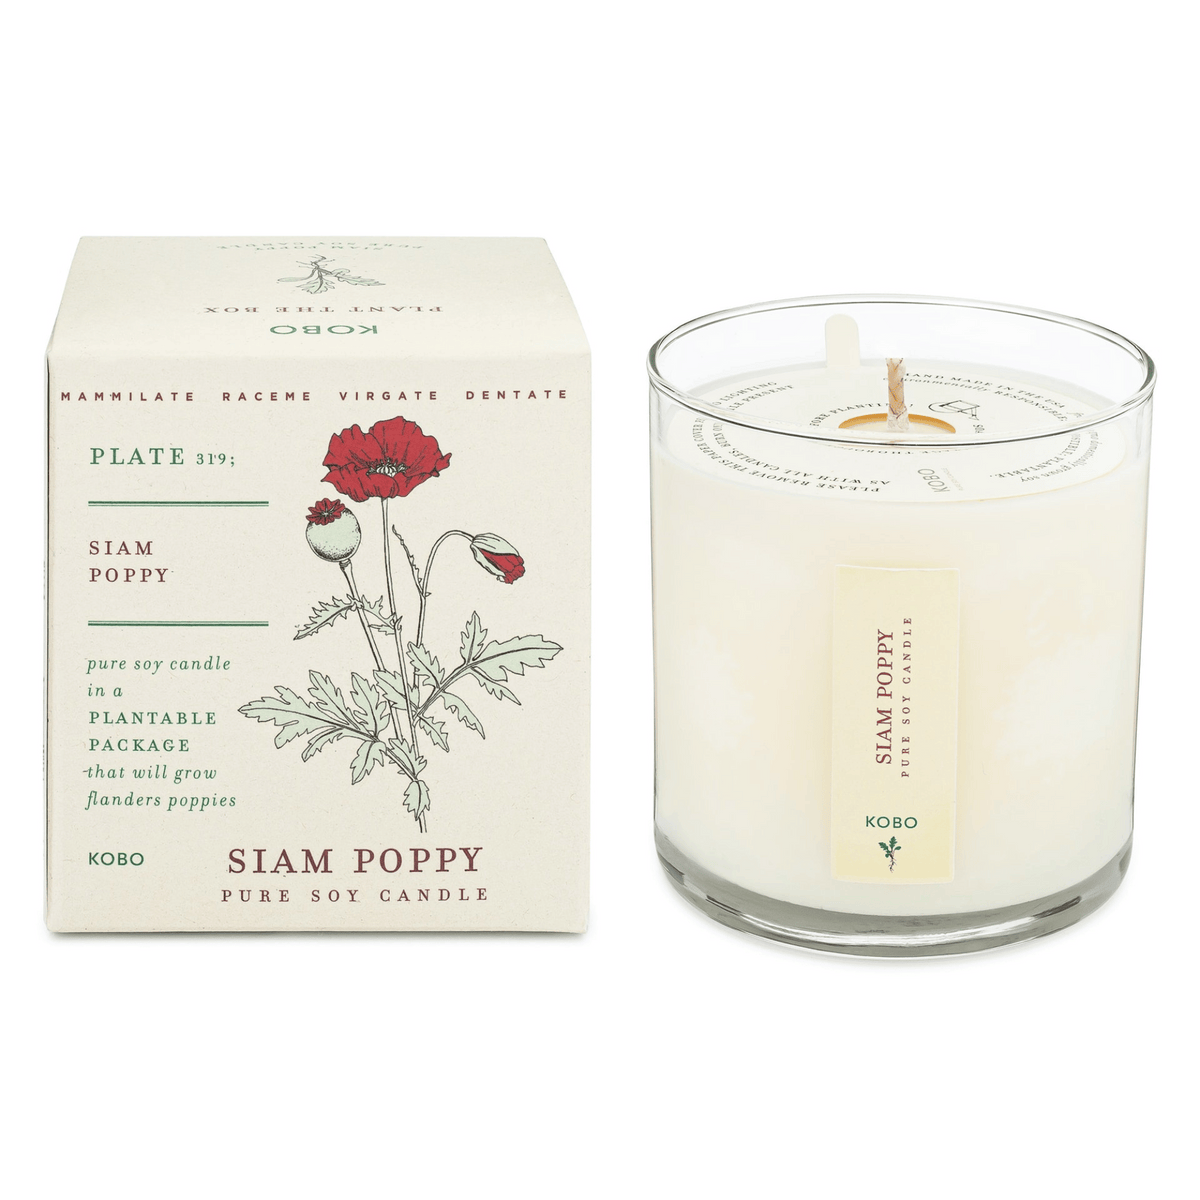 Primary Image of Siam Poppy Plant the Box Candle